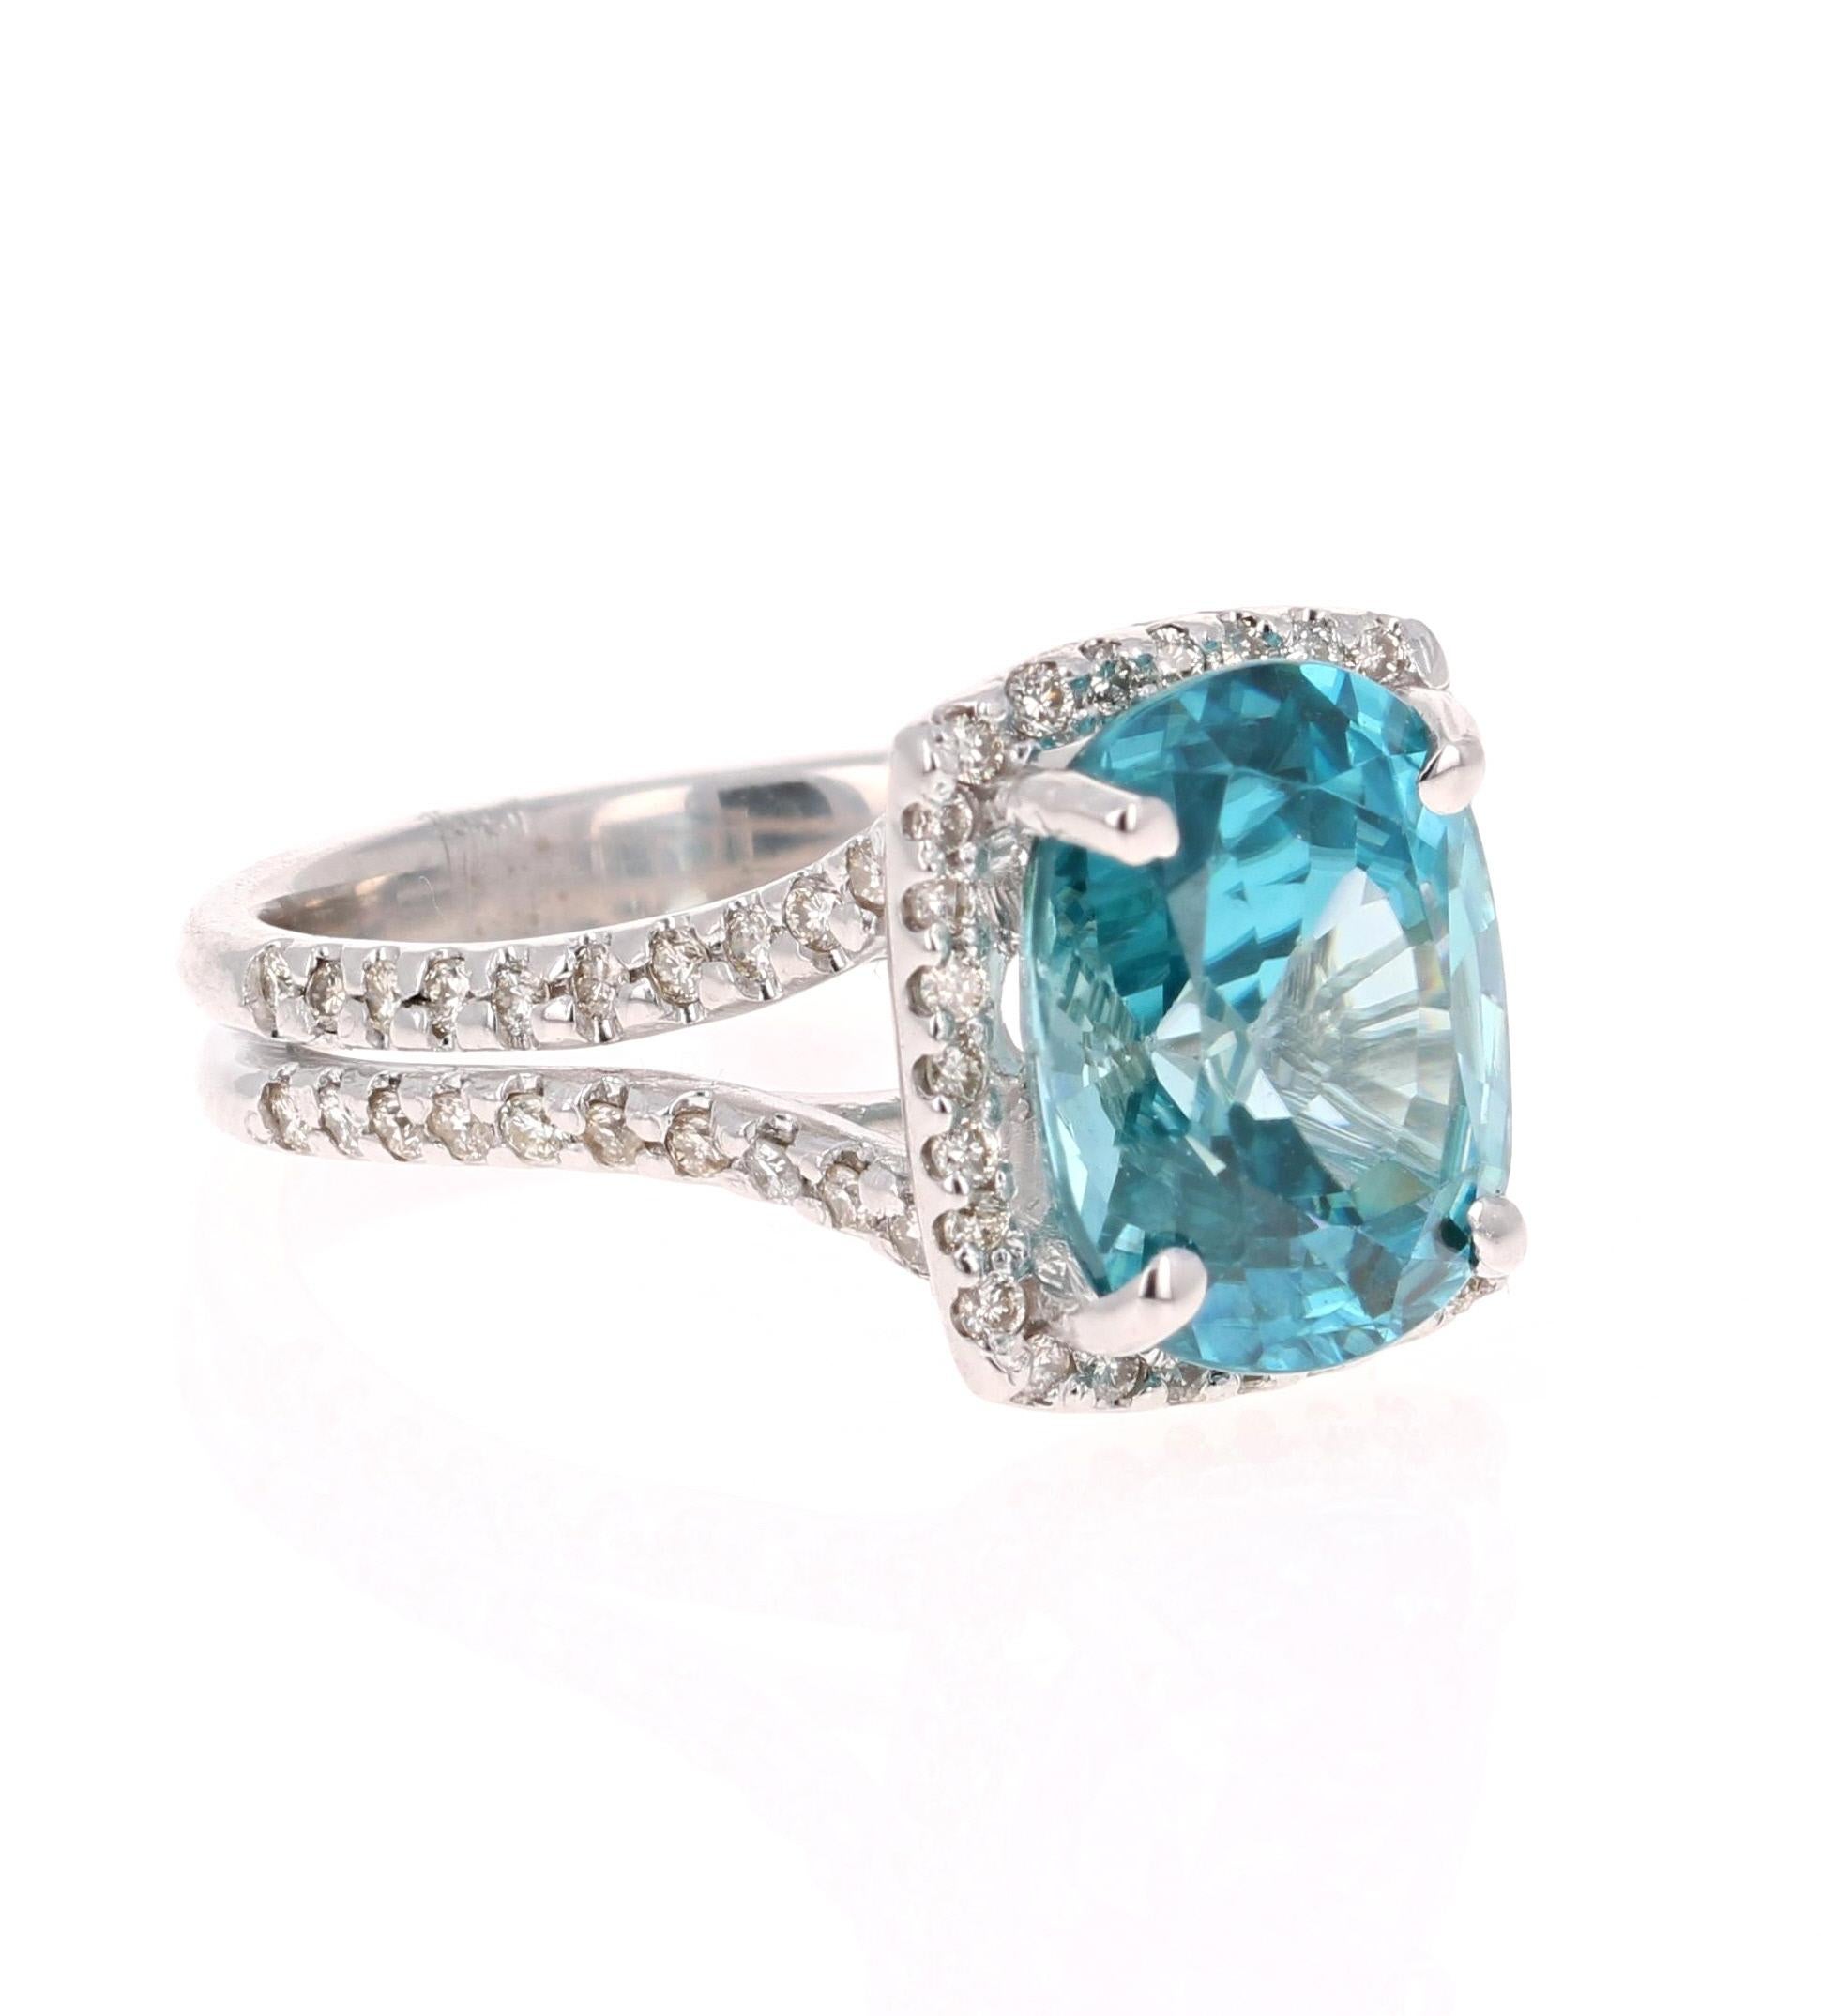 A Dazzling Blue Zircon and Diamond Ring! Blue Zircon is a natural stone mined in different parts of the world, mainly Sri Lanka, Myanmar, and Australia. 

This Oval Cut Blue Zircon is 6.83 Carats and is surrounded by a halo and split shank of 70